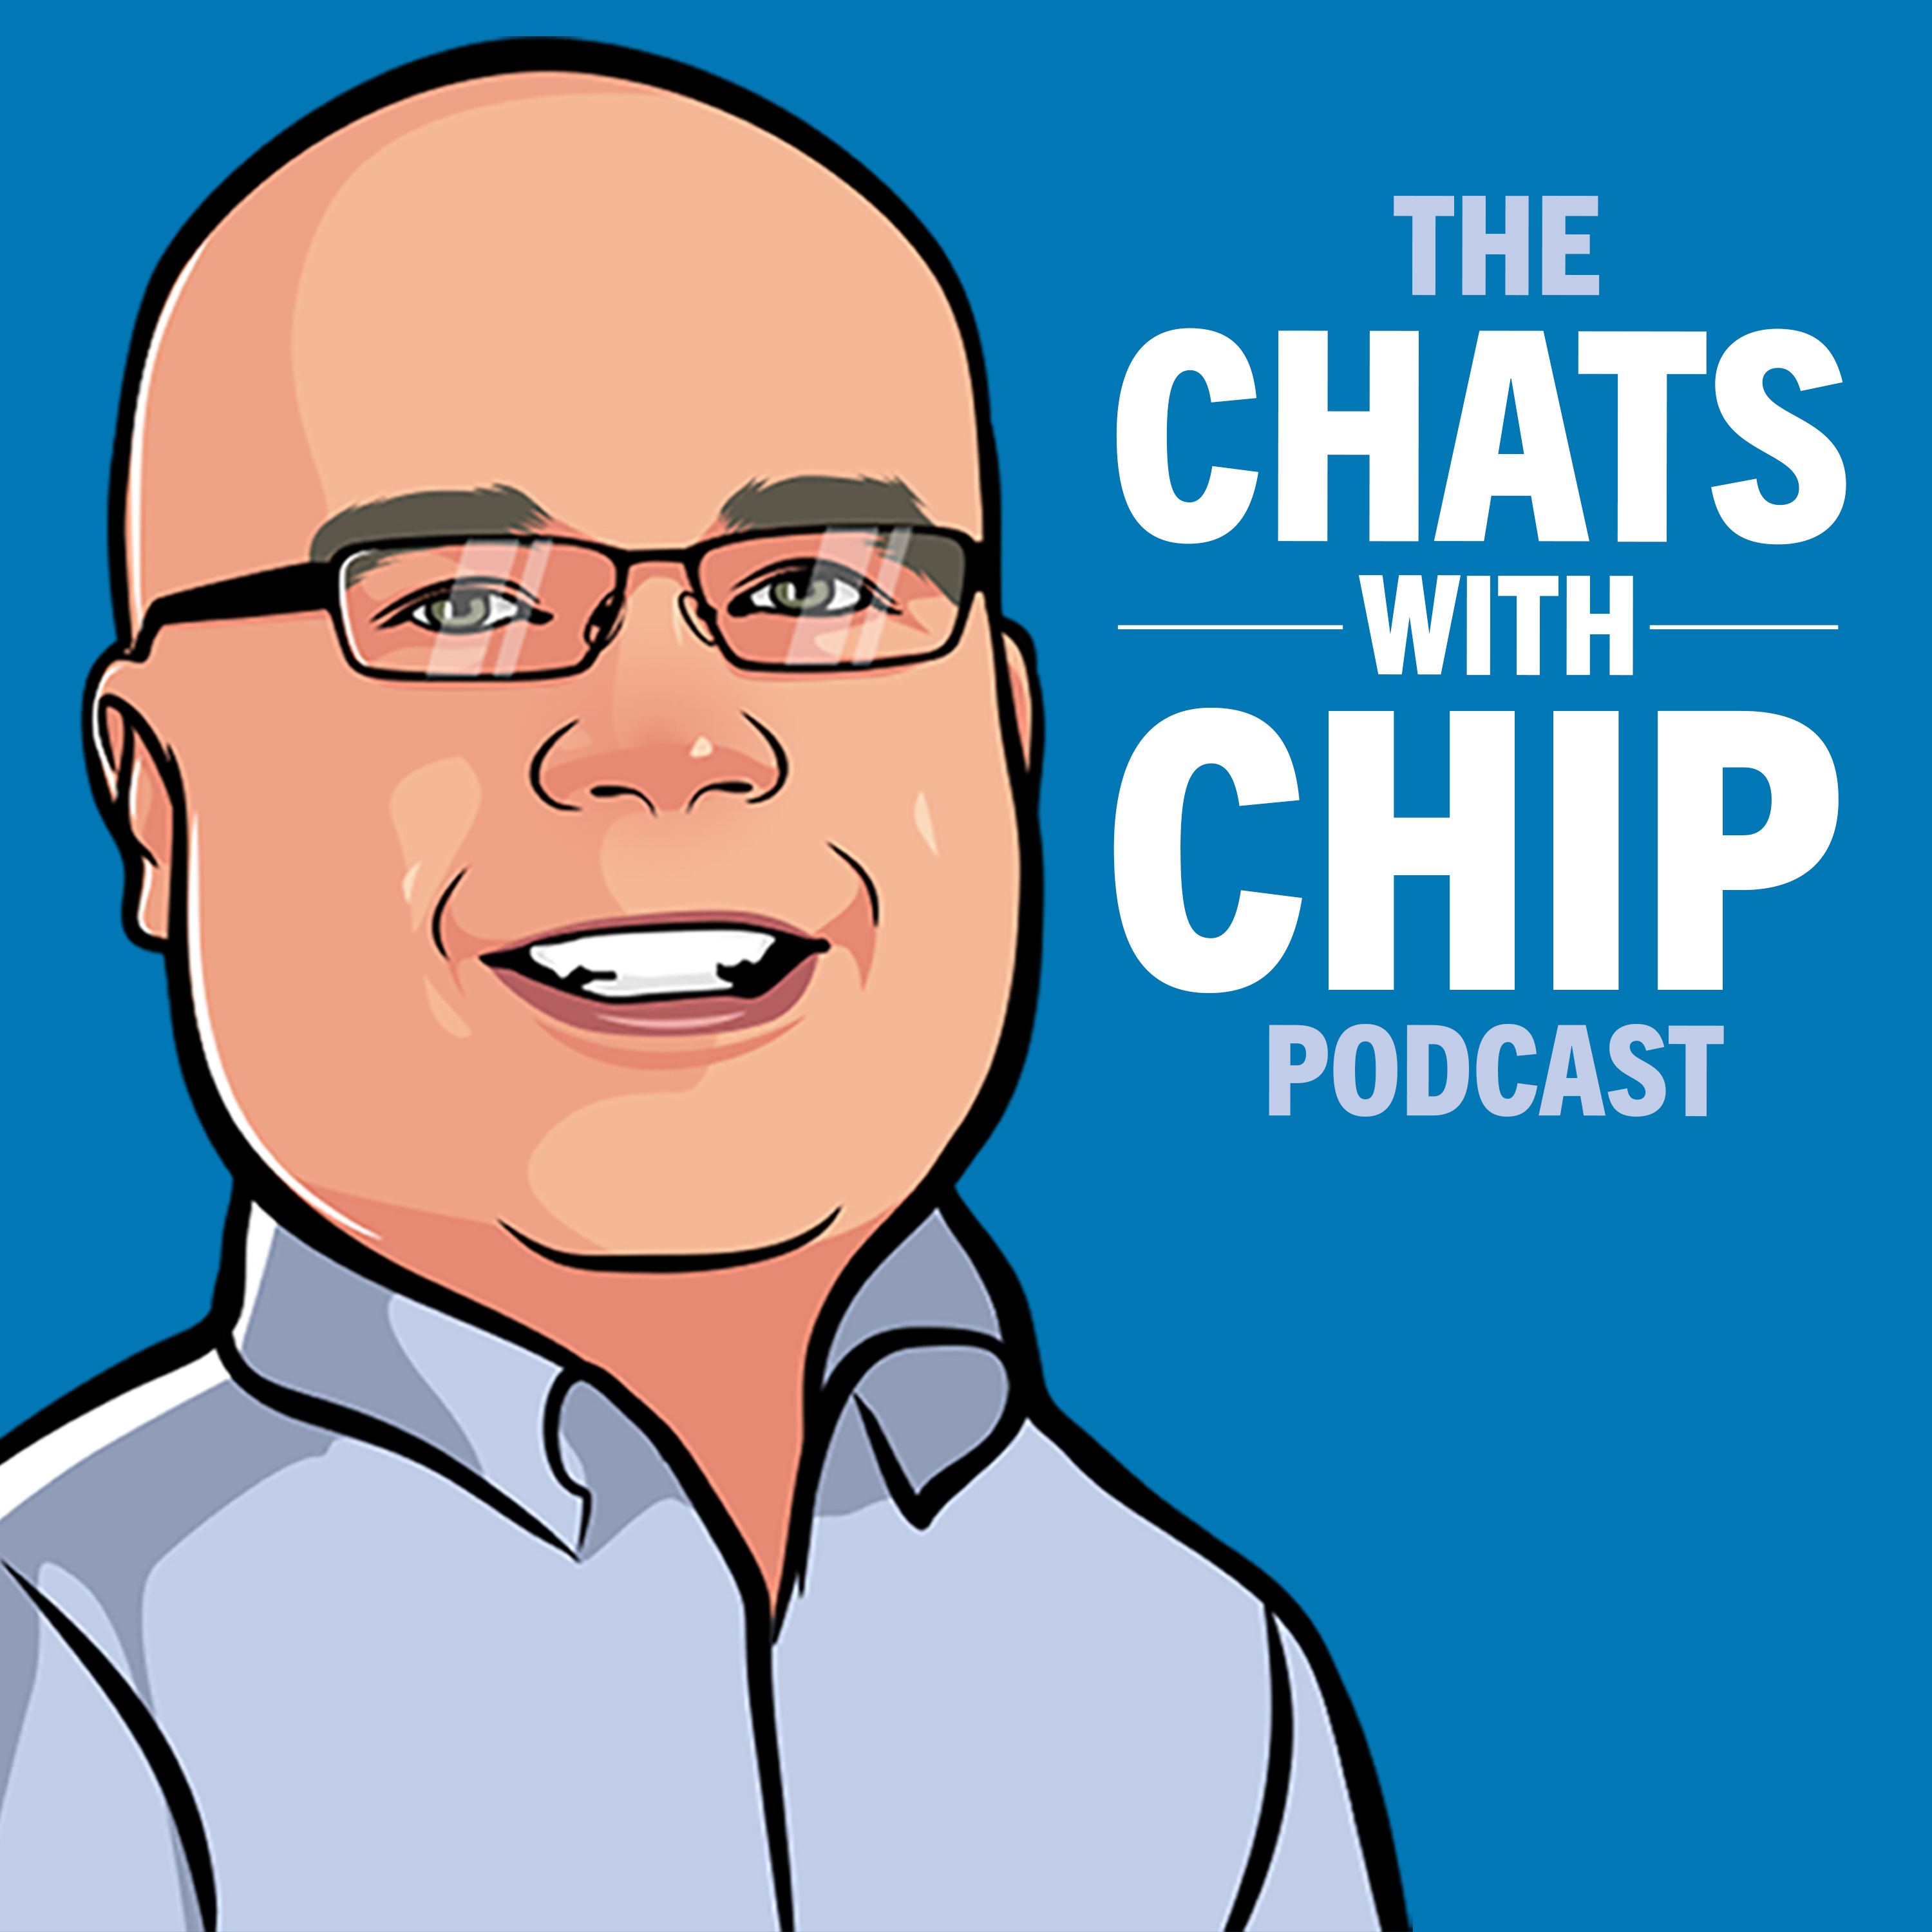 The Chats with Chip Podcast